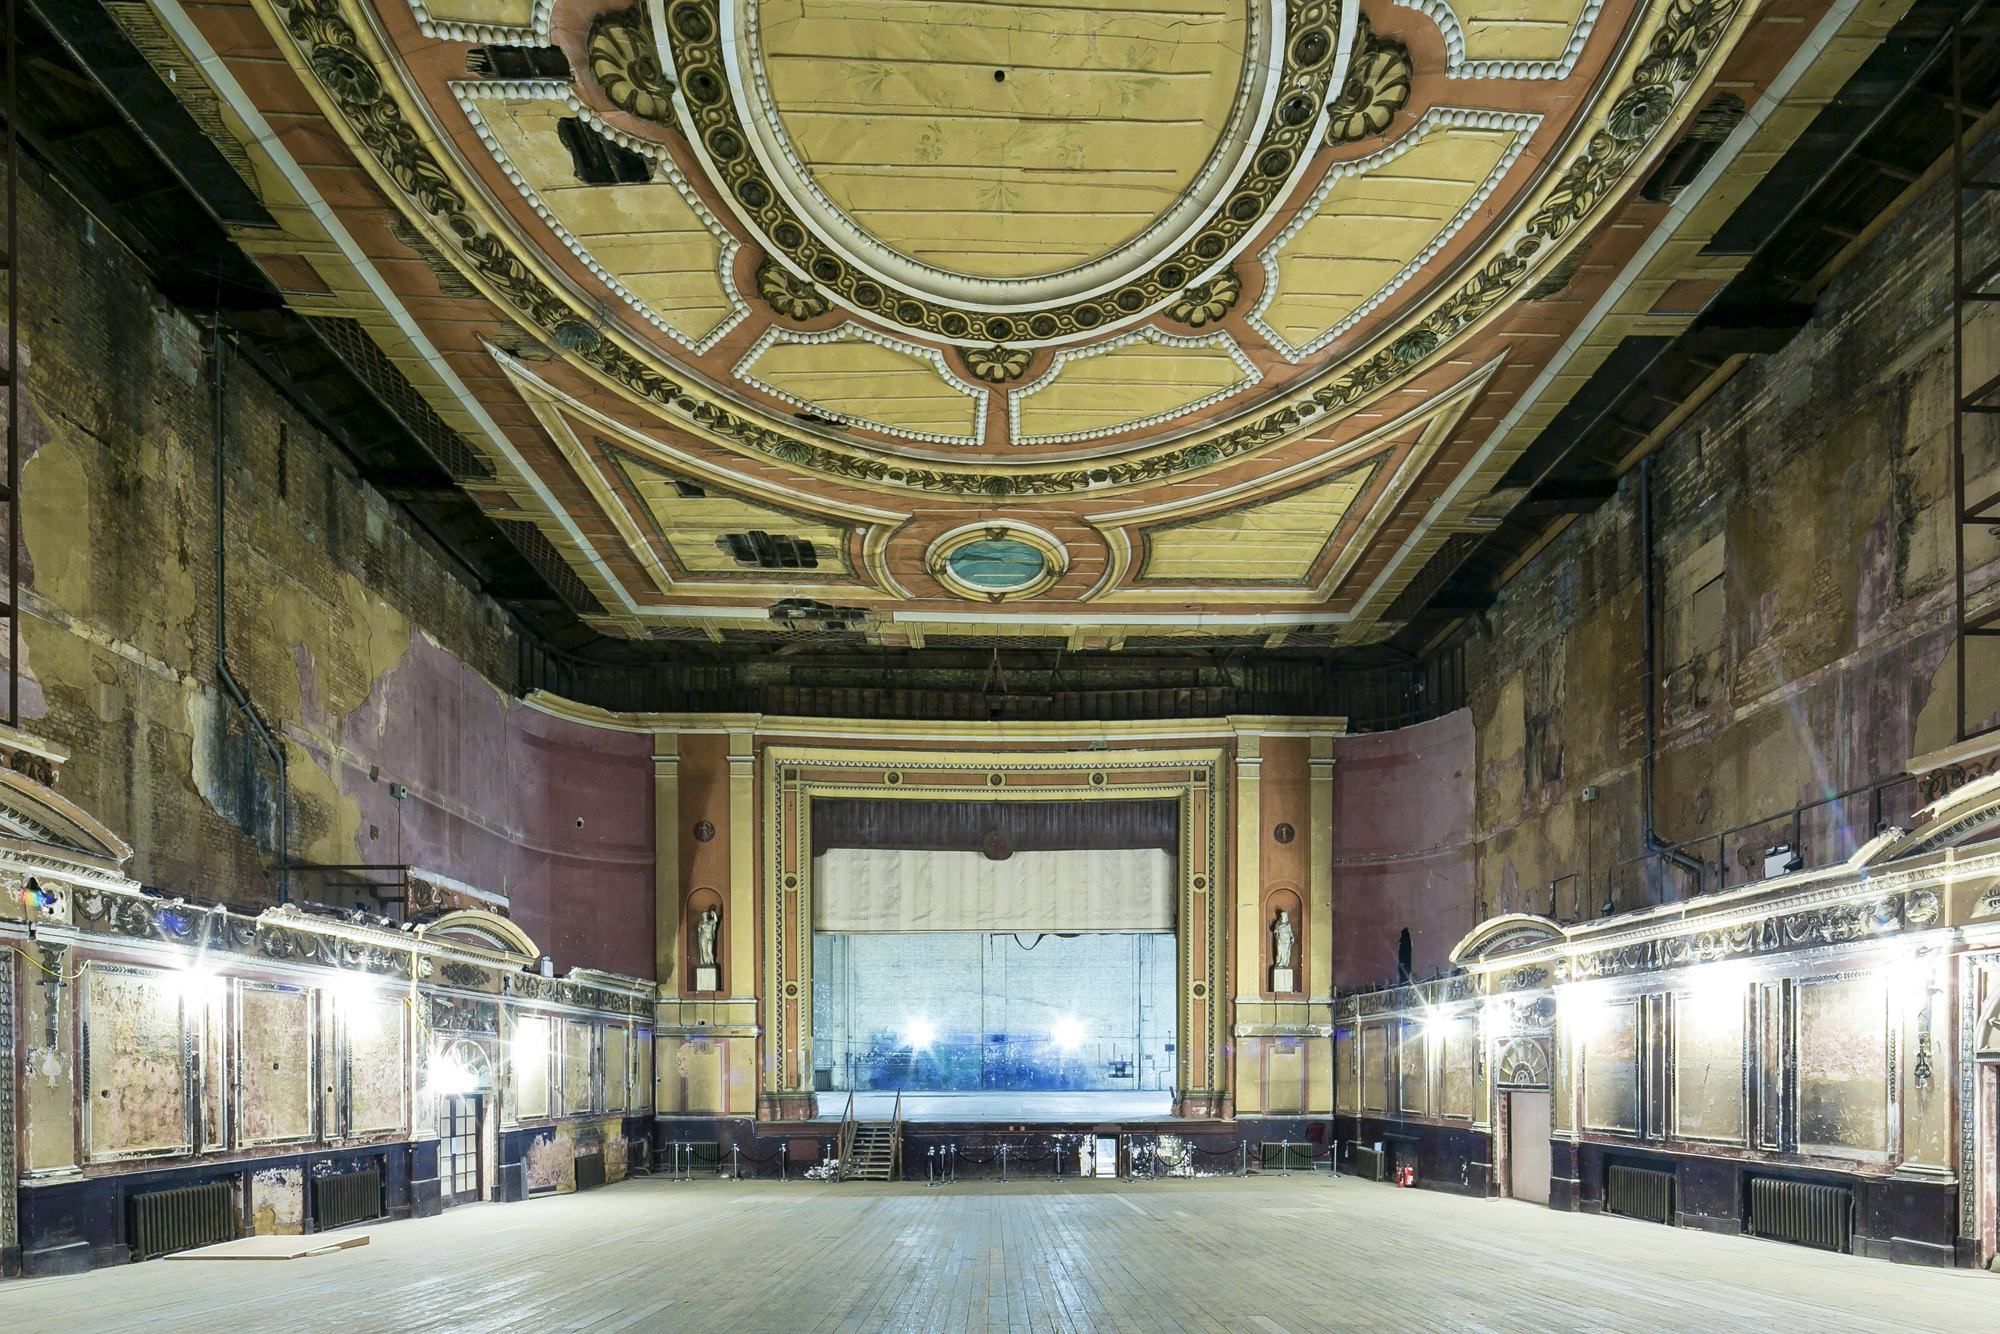 Alexandra Palace Theatre london oldest theatre victorian revamp grade II listed space cool interiors receptions banquets getty images